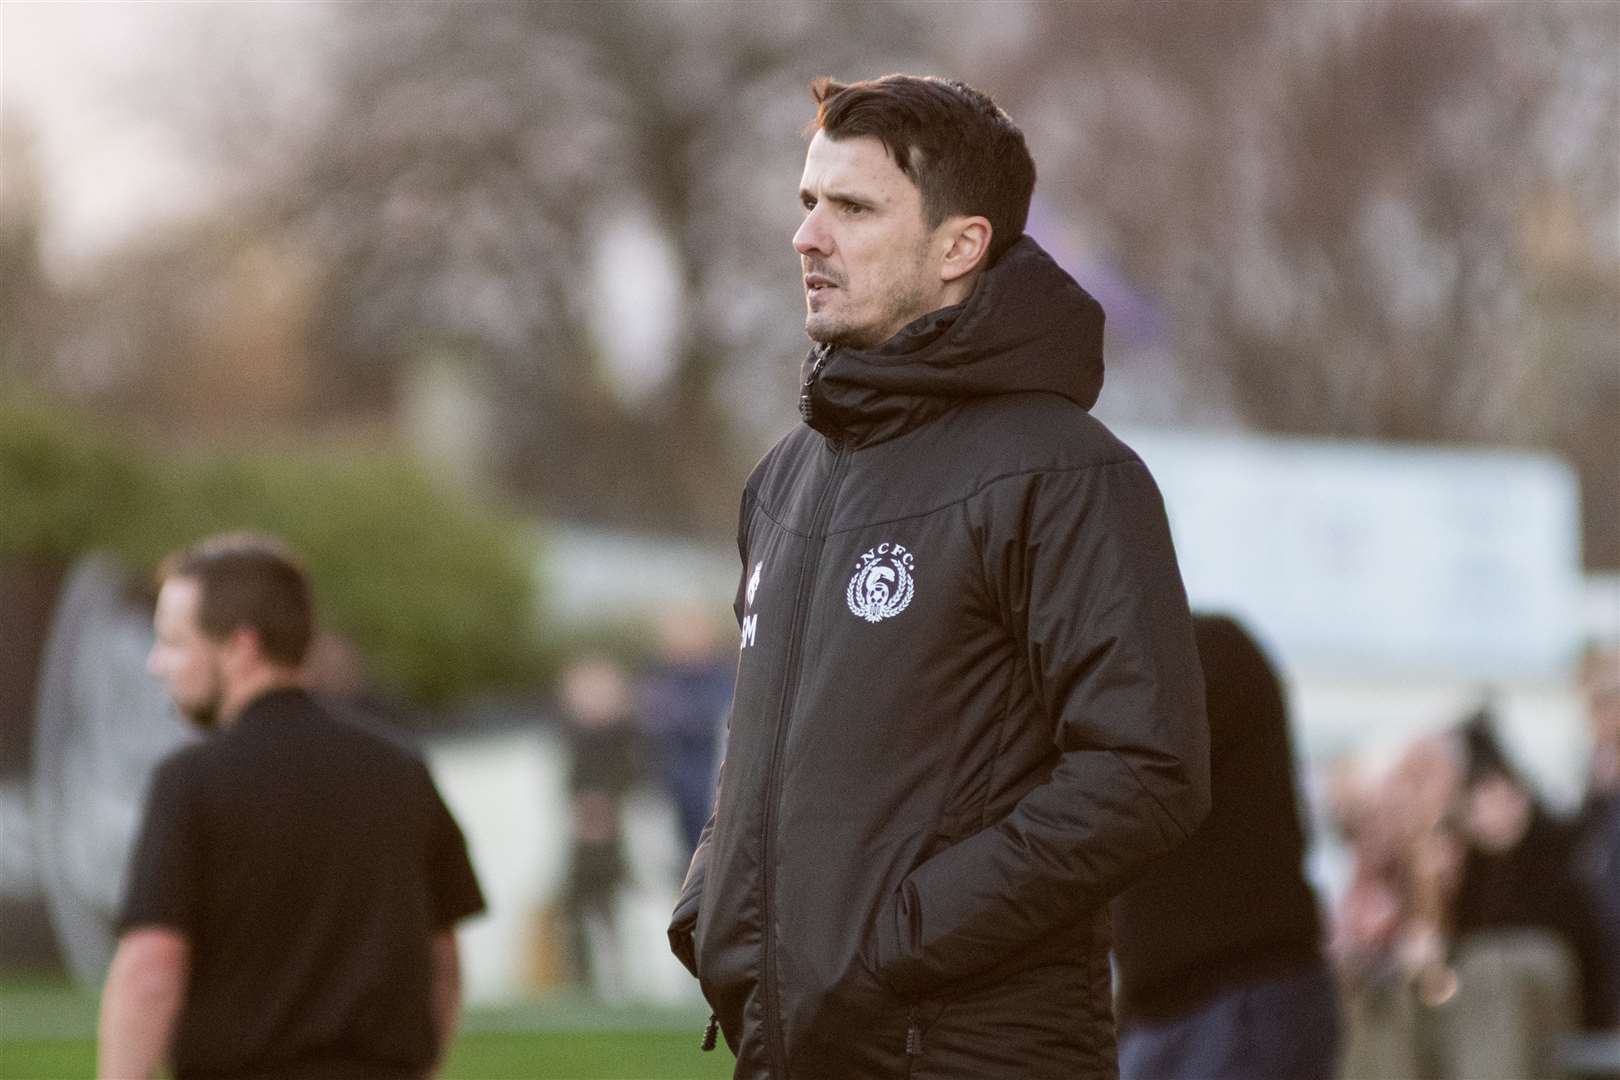 Nairn County manager Steven MacKay...Forres Mechanics FC (3) vs Nairn County FC (4) - Highland Football League 22/23 - Mosset Park, Forres 26/11/2022...Picture: Daniel Forsyth..